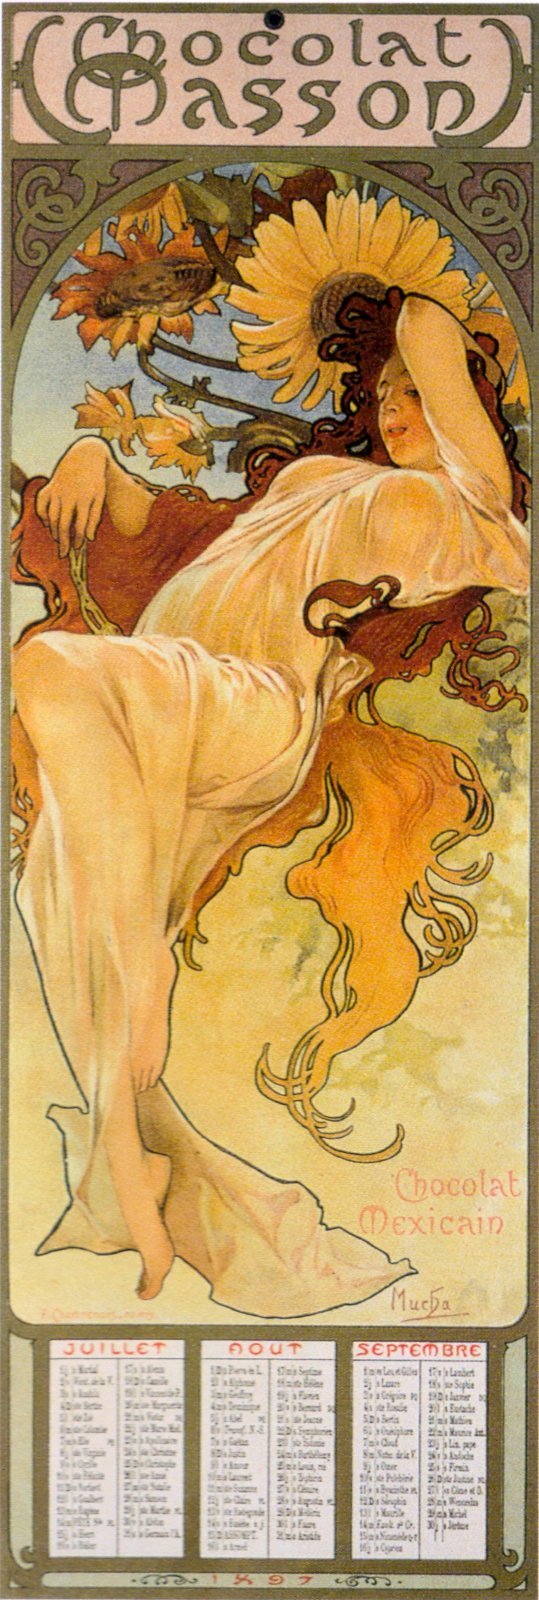 Alfons Maria Mucha's Art Nouveau decorative paintings, advertisements and illustrations [dvdbash]